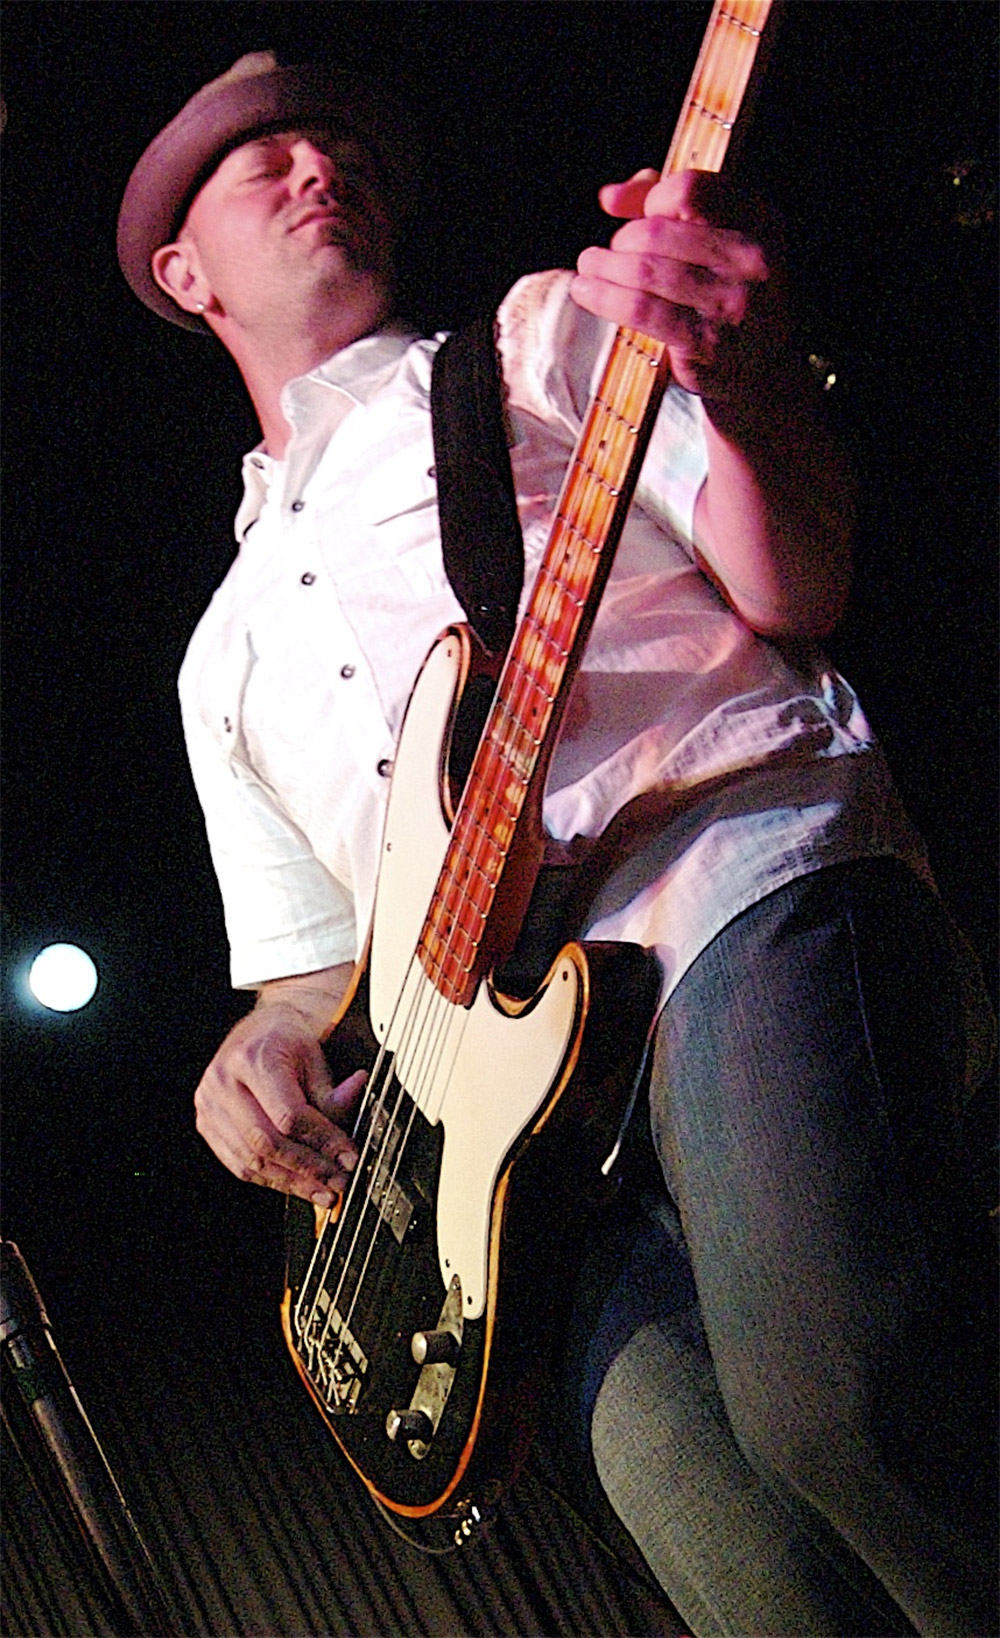 Steve Cook playing bass on stage